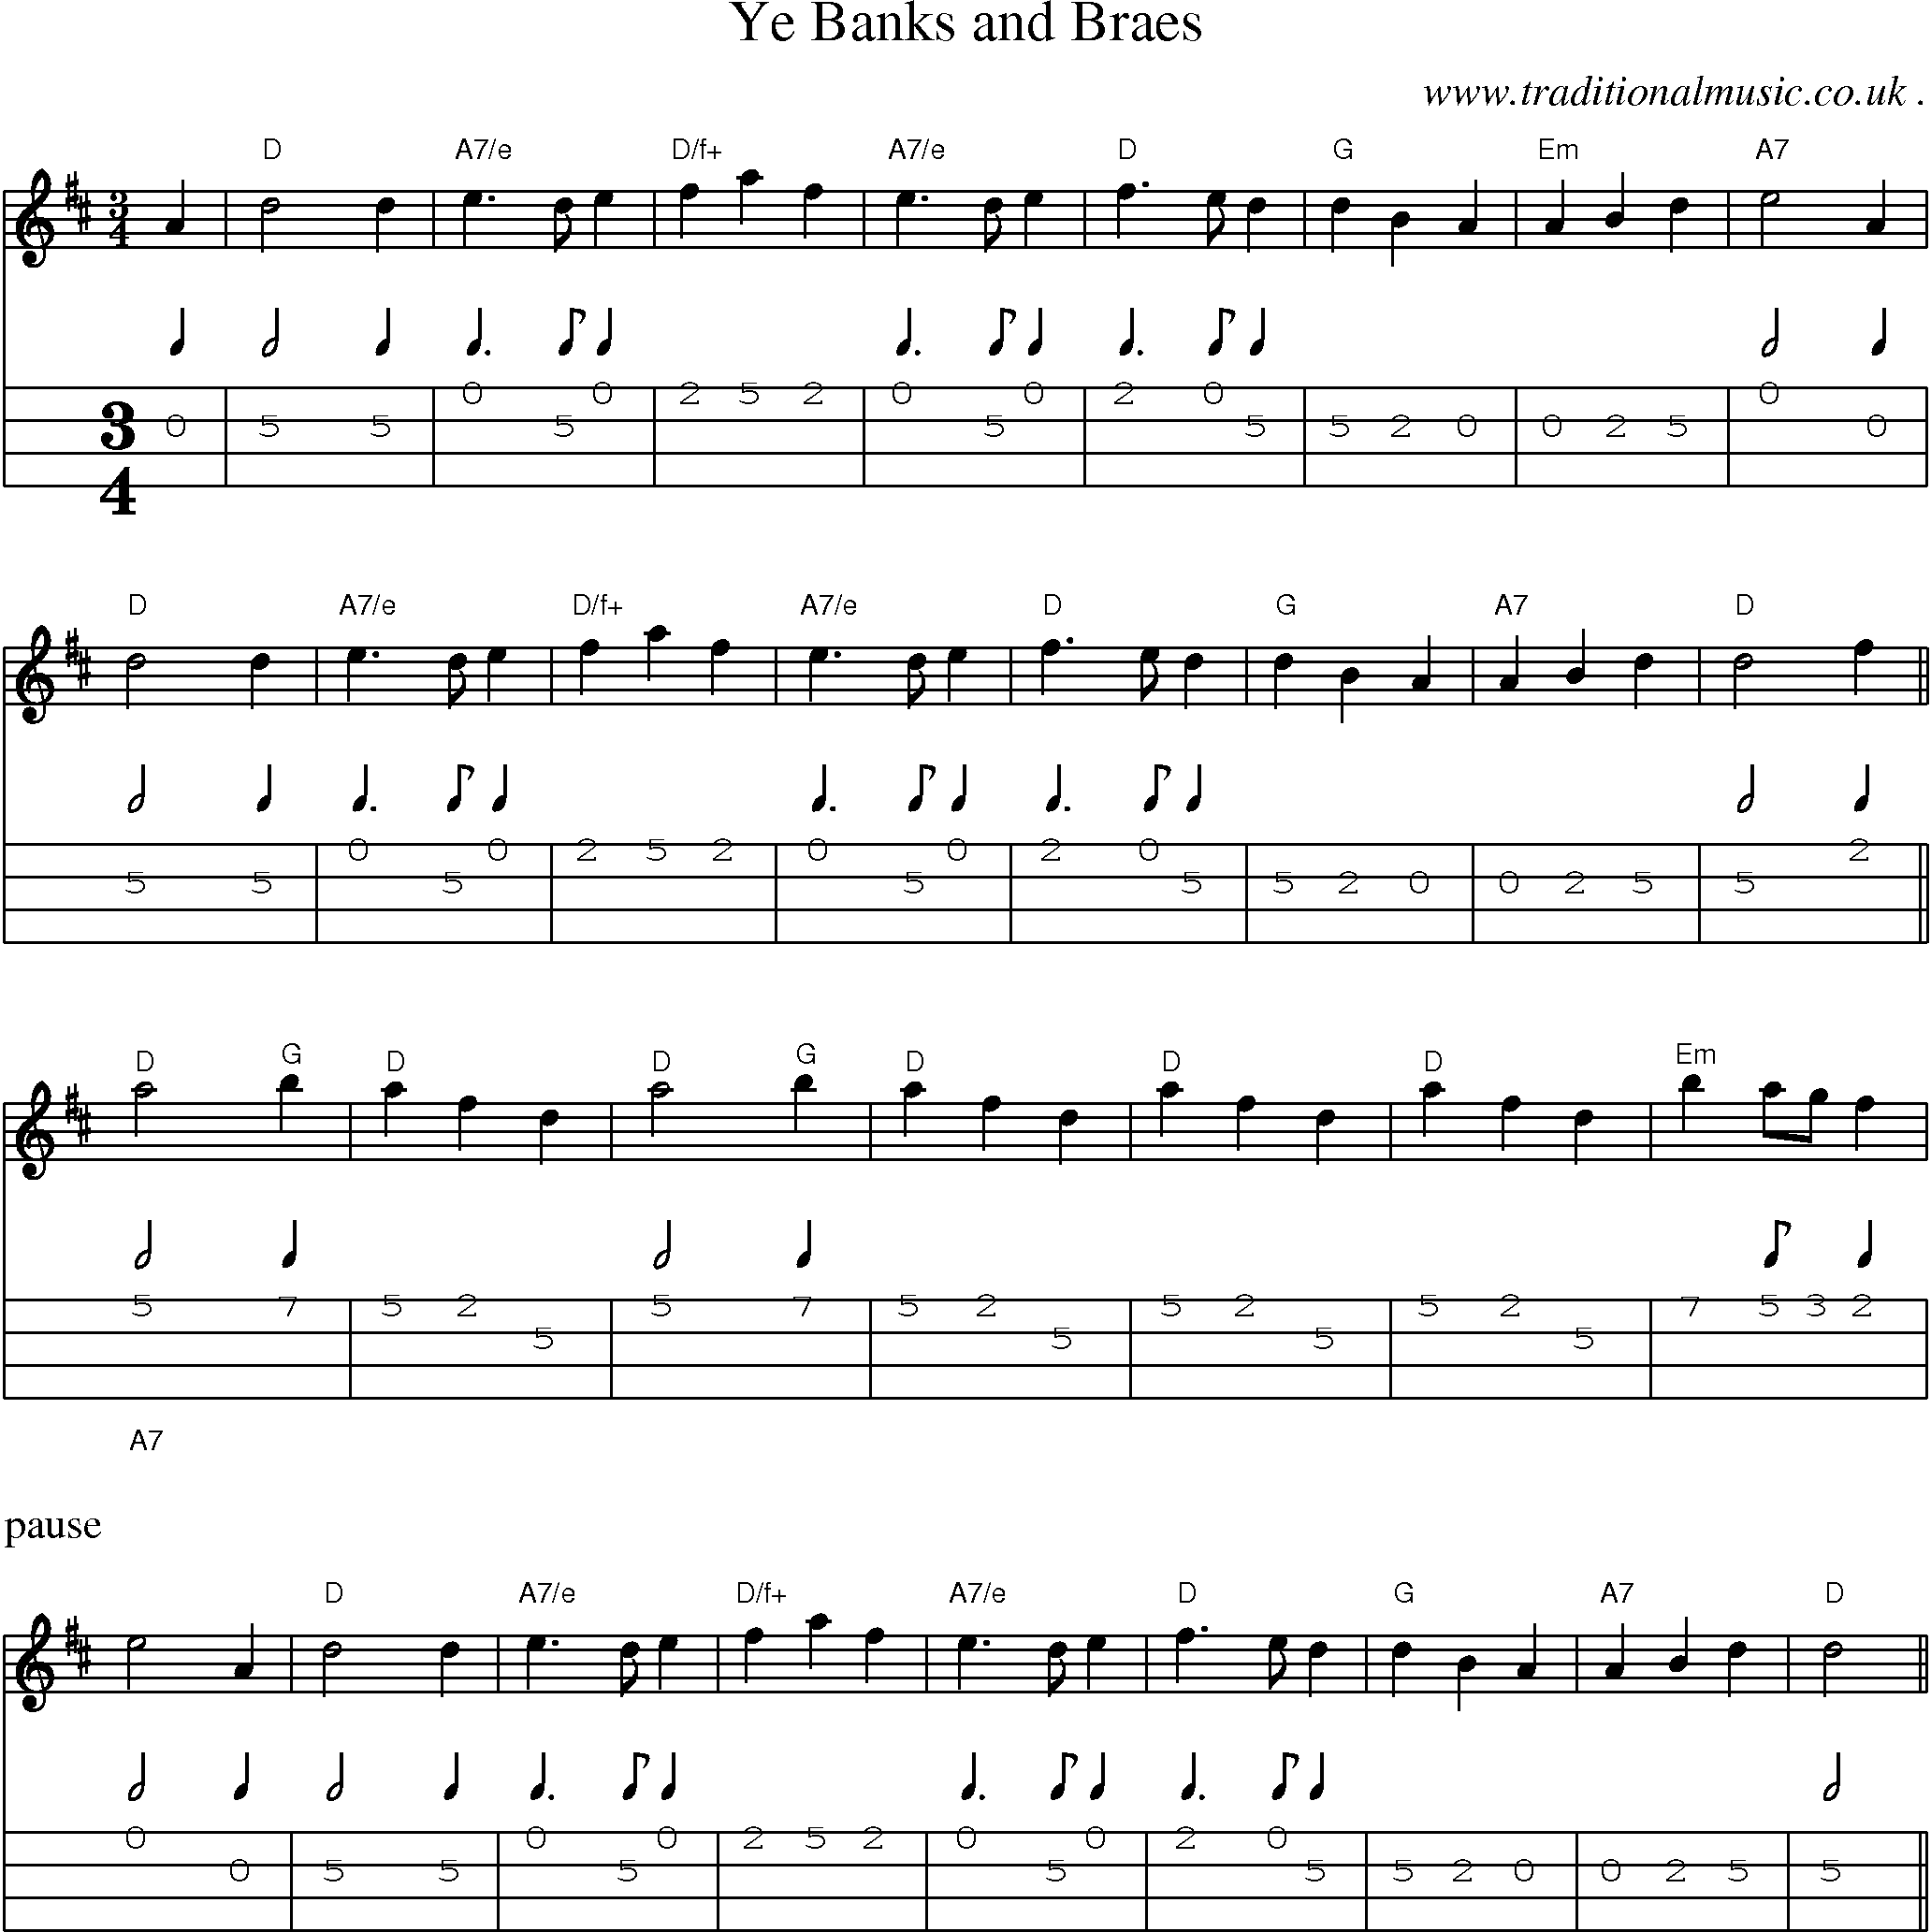 Sheet-music  score, Chords and Mandolin Tabs for Ye Banks And Braes